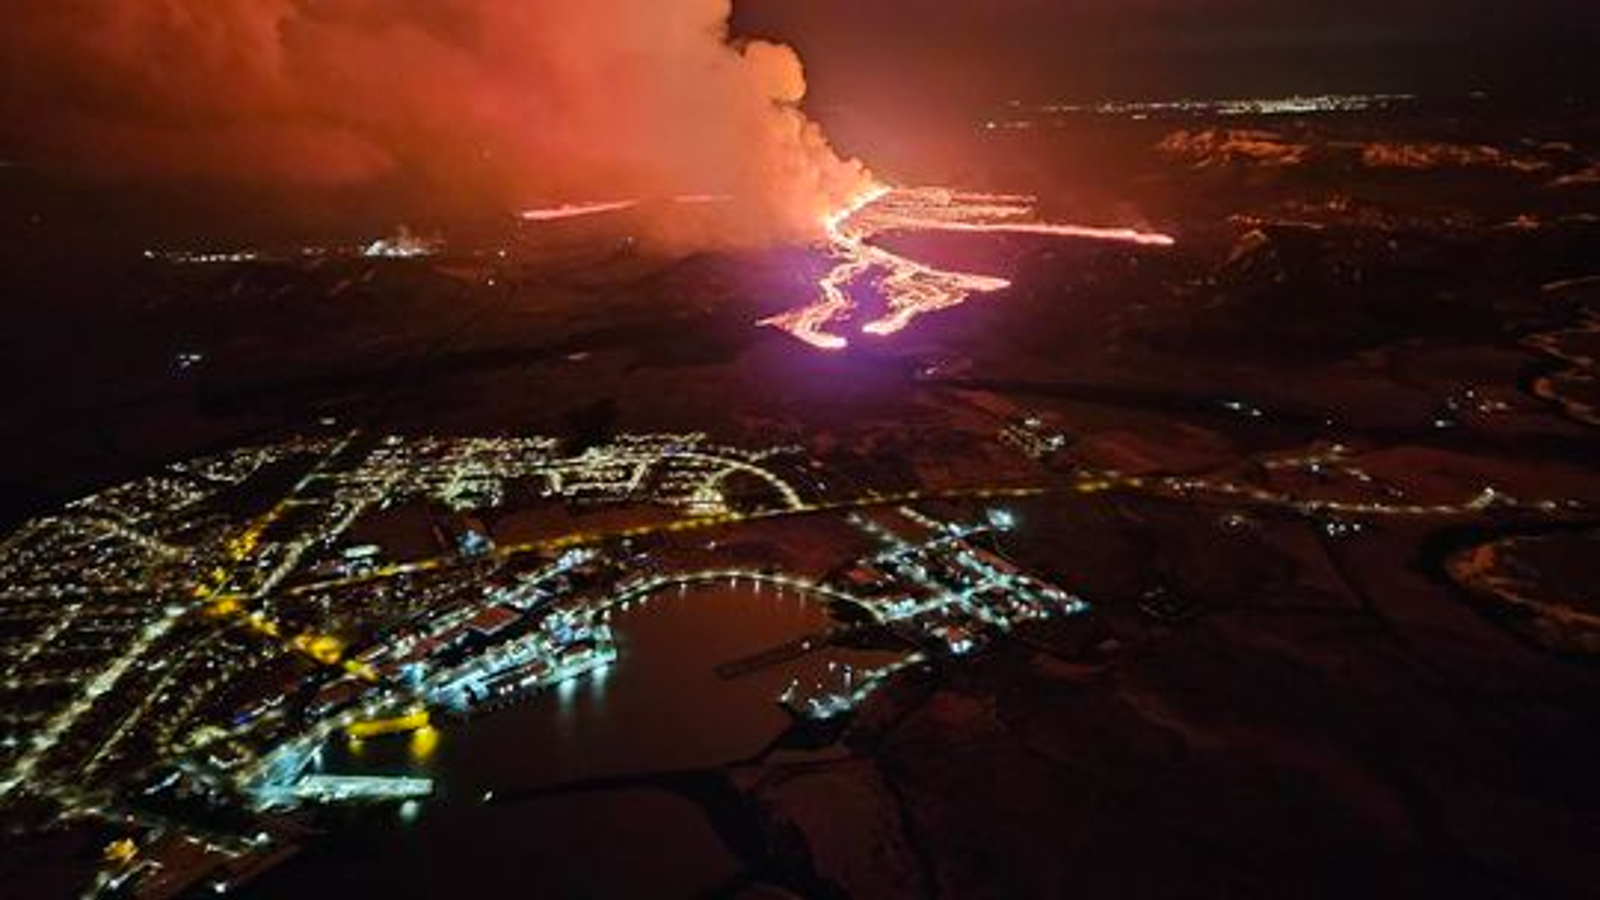 A volcanic eruption at night with a coastal town in the foreground